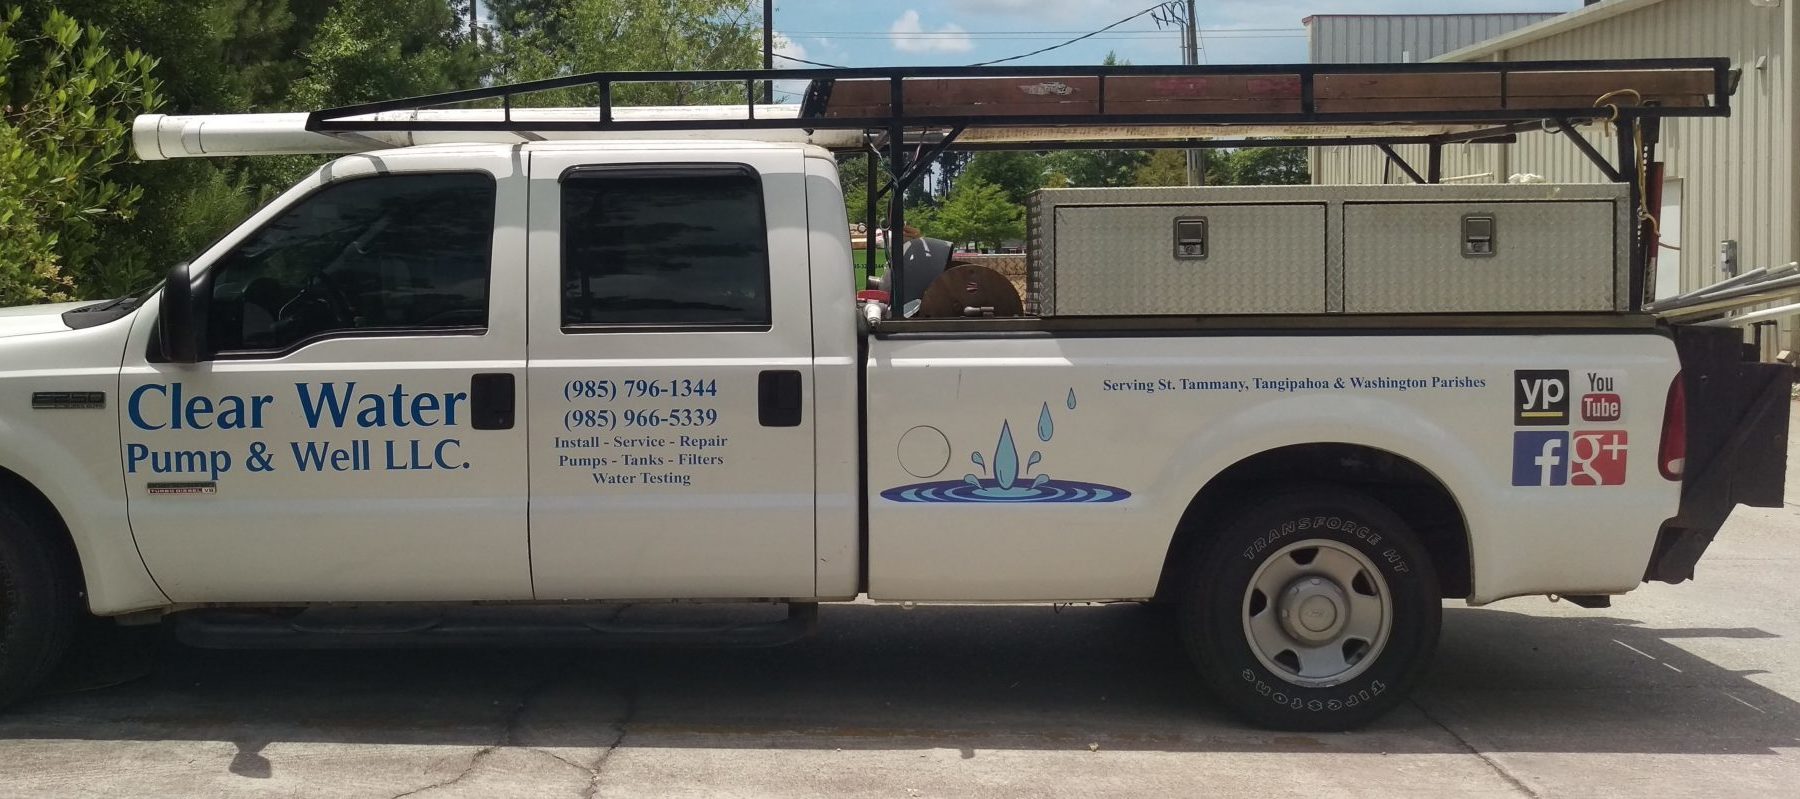 Clear Water Pump & Well LLC. – water well repair, pump, tank, filter, stains, color, submersible, above ground, hand pump, water softener, iron, low ph, manganese, tannin, carbon, salt, sand, gravel